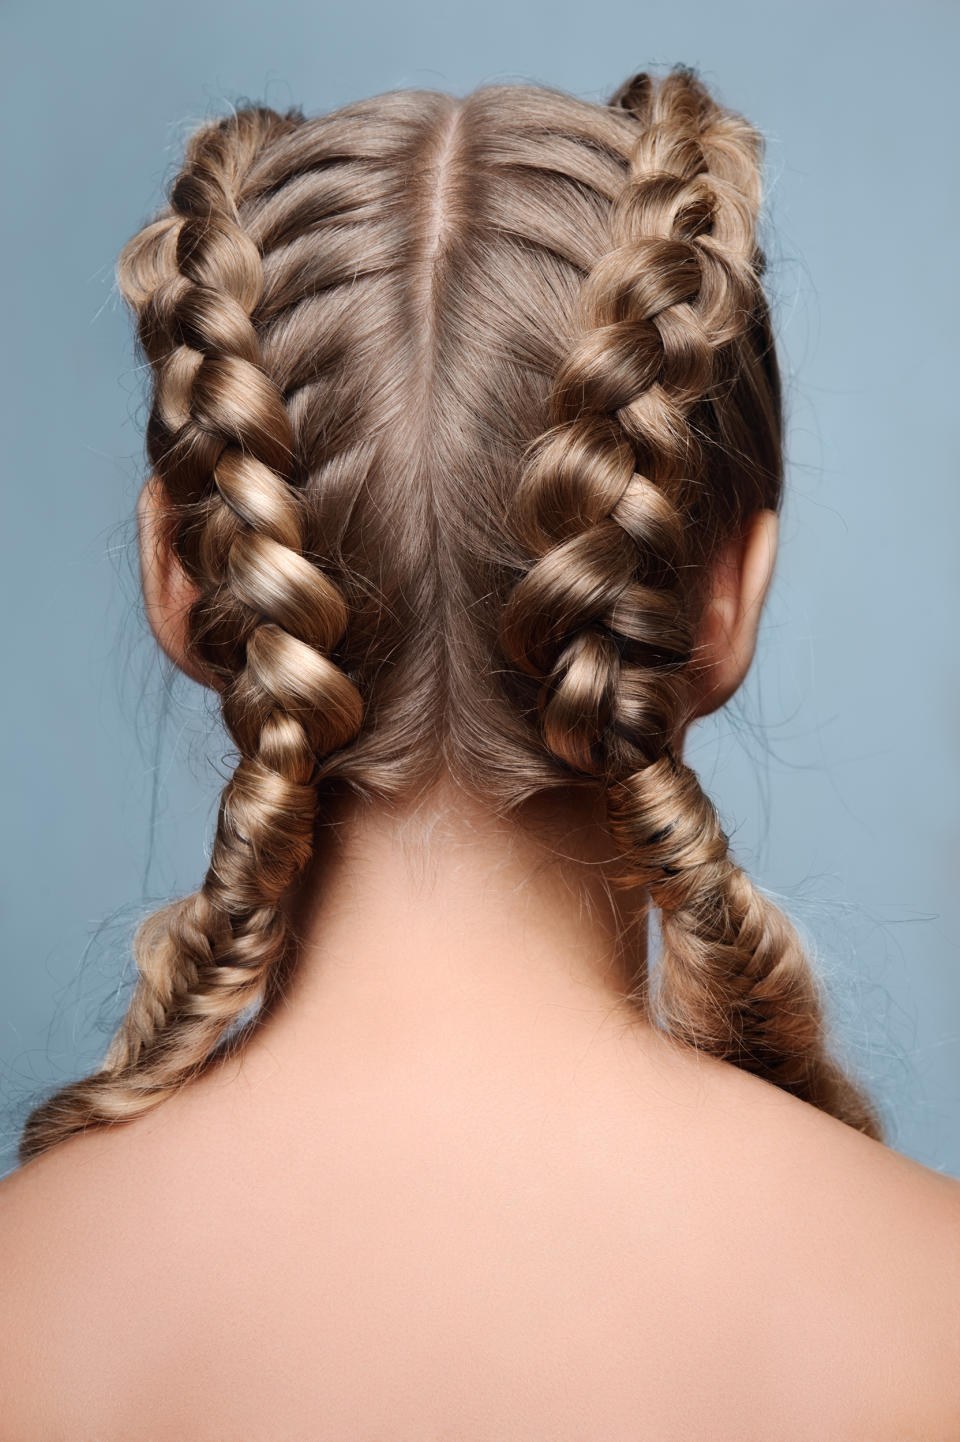 How to French braid hair; French braid pigtails (Getty Images stock)